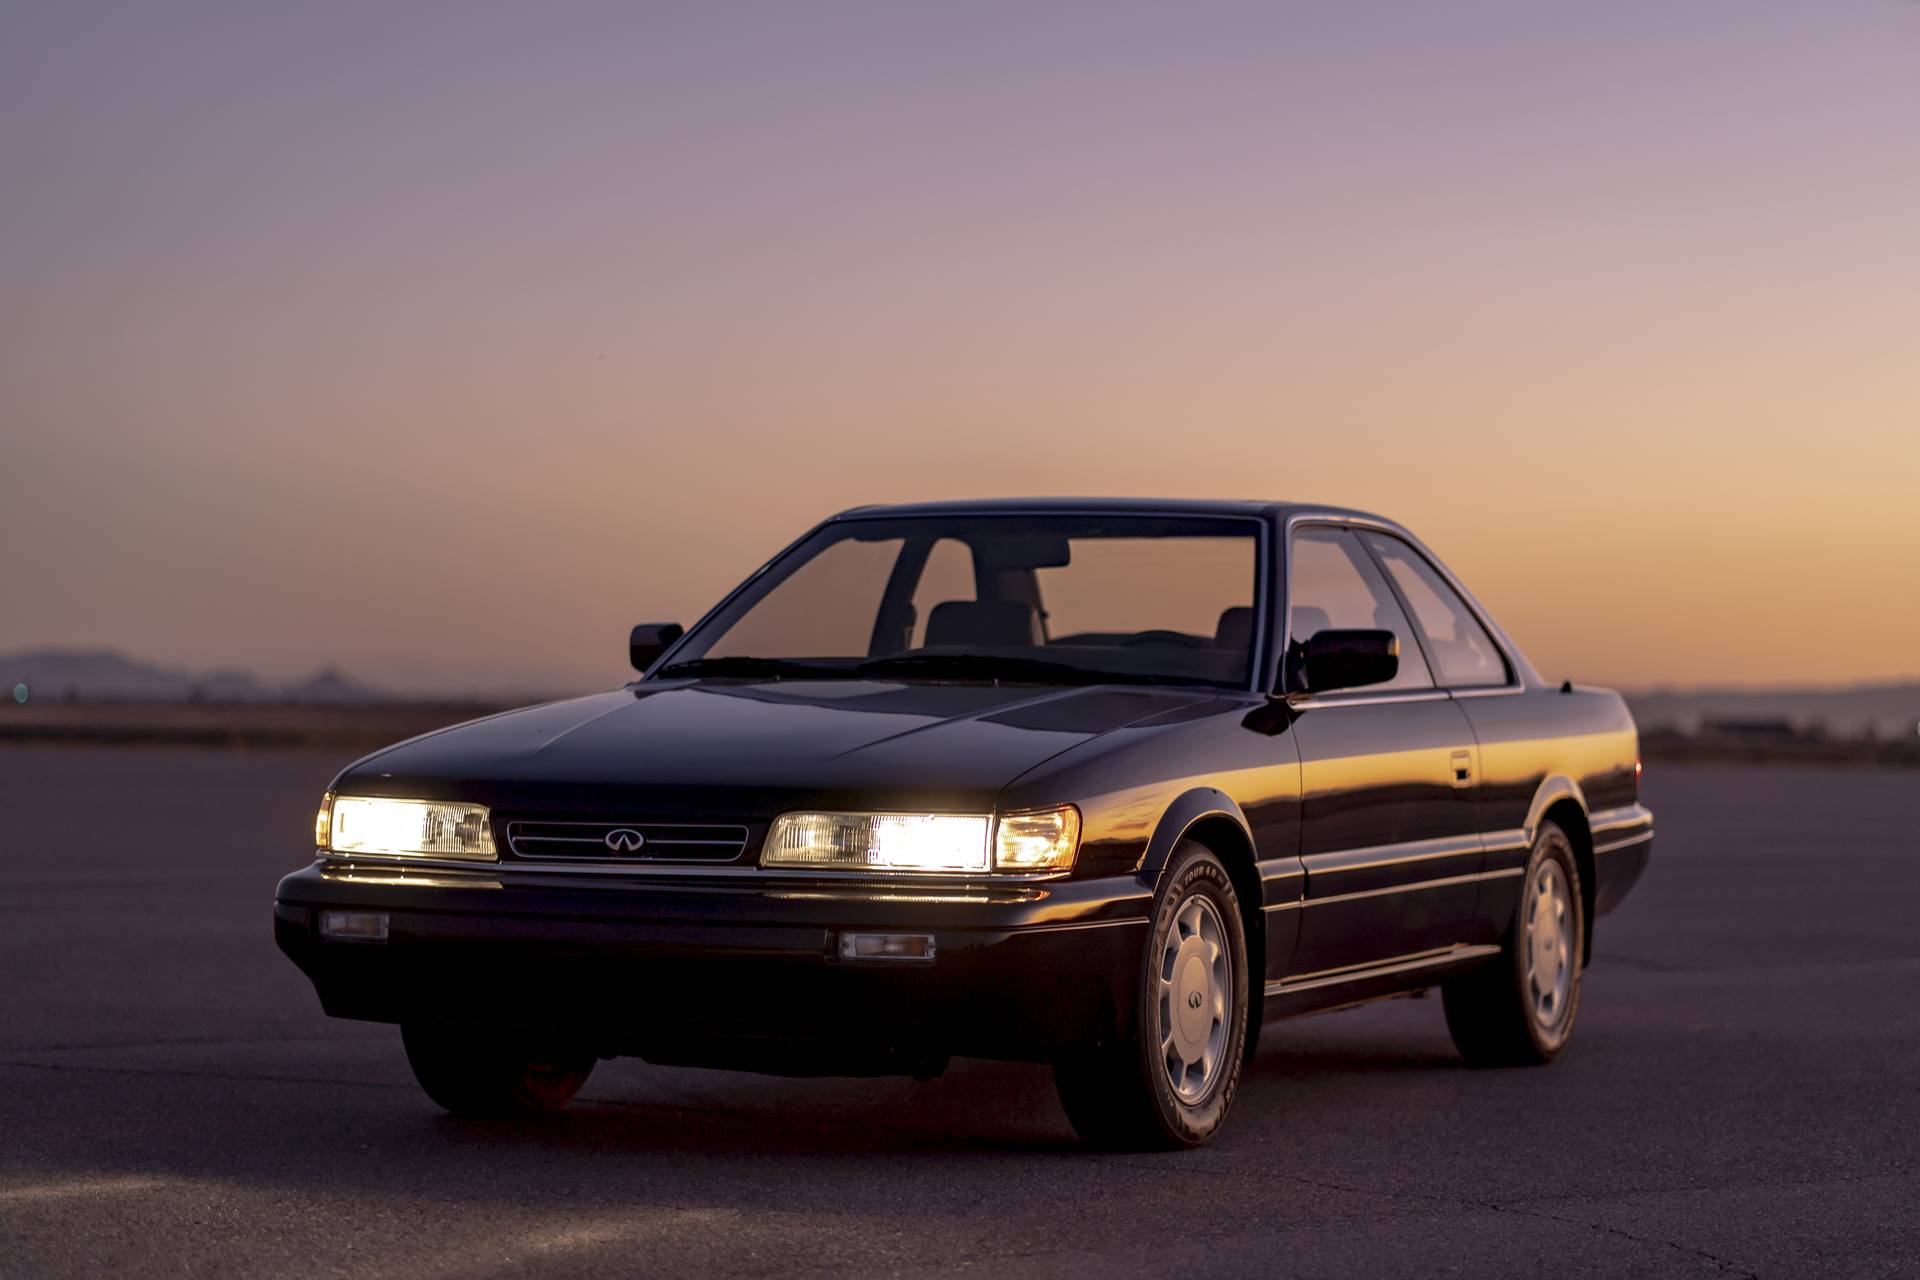 Raise your coupes: A toast to sleek INFINITI shapes over the years